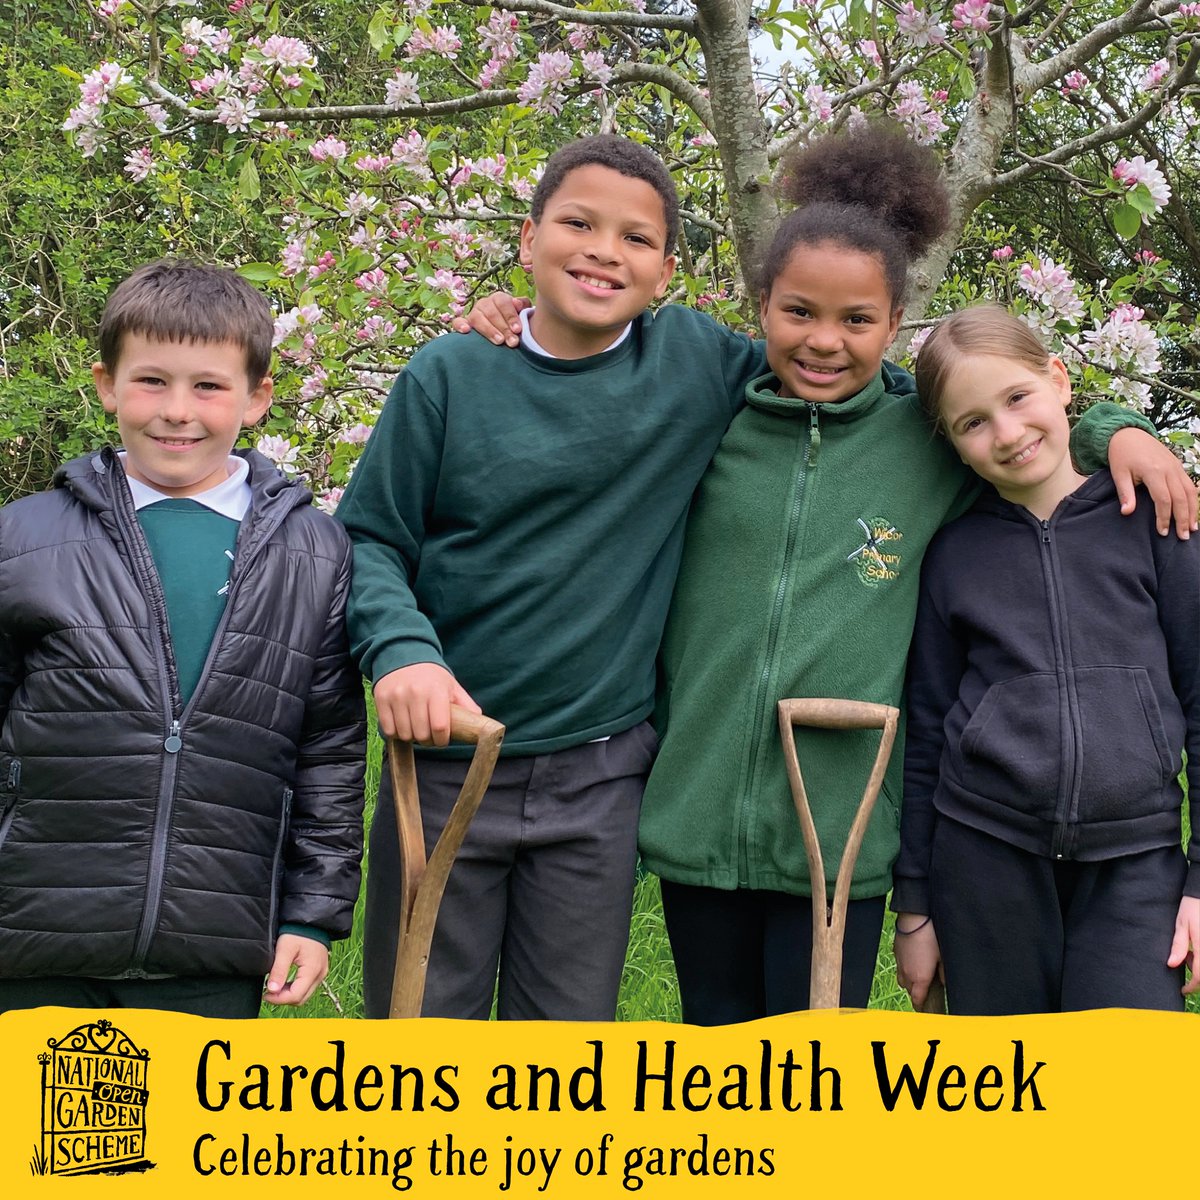 Each year our funder, @NGSOpenGardens publish a beautiful booklet to mark #GardensandHealth Week, celebrating the joy of gardens and gardening. 
Read more here👉: indd.adobe.com/view/646bb23c-… #gardensaregoodforyou #gardensopenforcharity